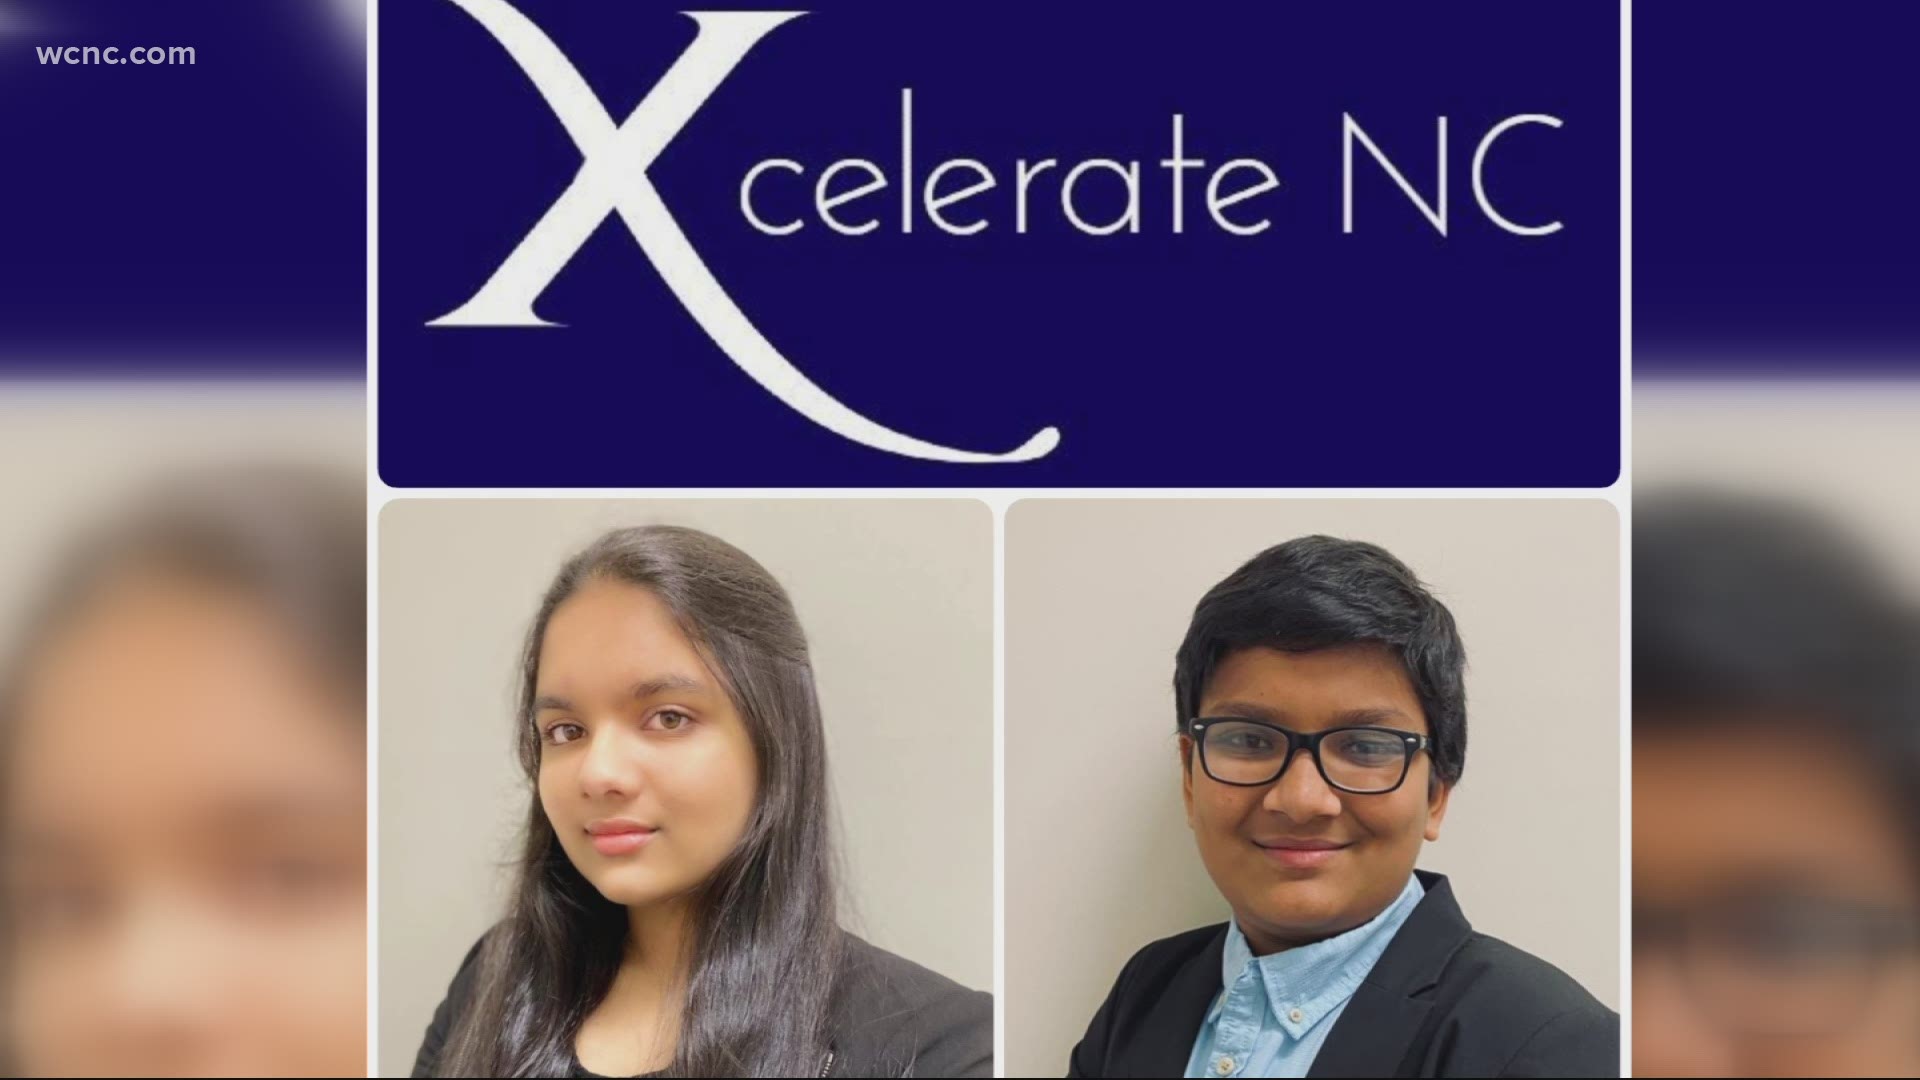 Xcelerate NC was formed by the sister-brother duo of Aditi and Anirudh Sengupta in June of 2020. They're now helping kids in all corners of the globe.